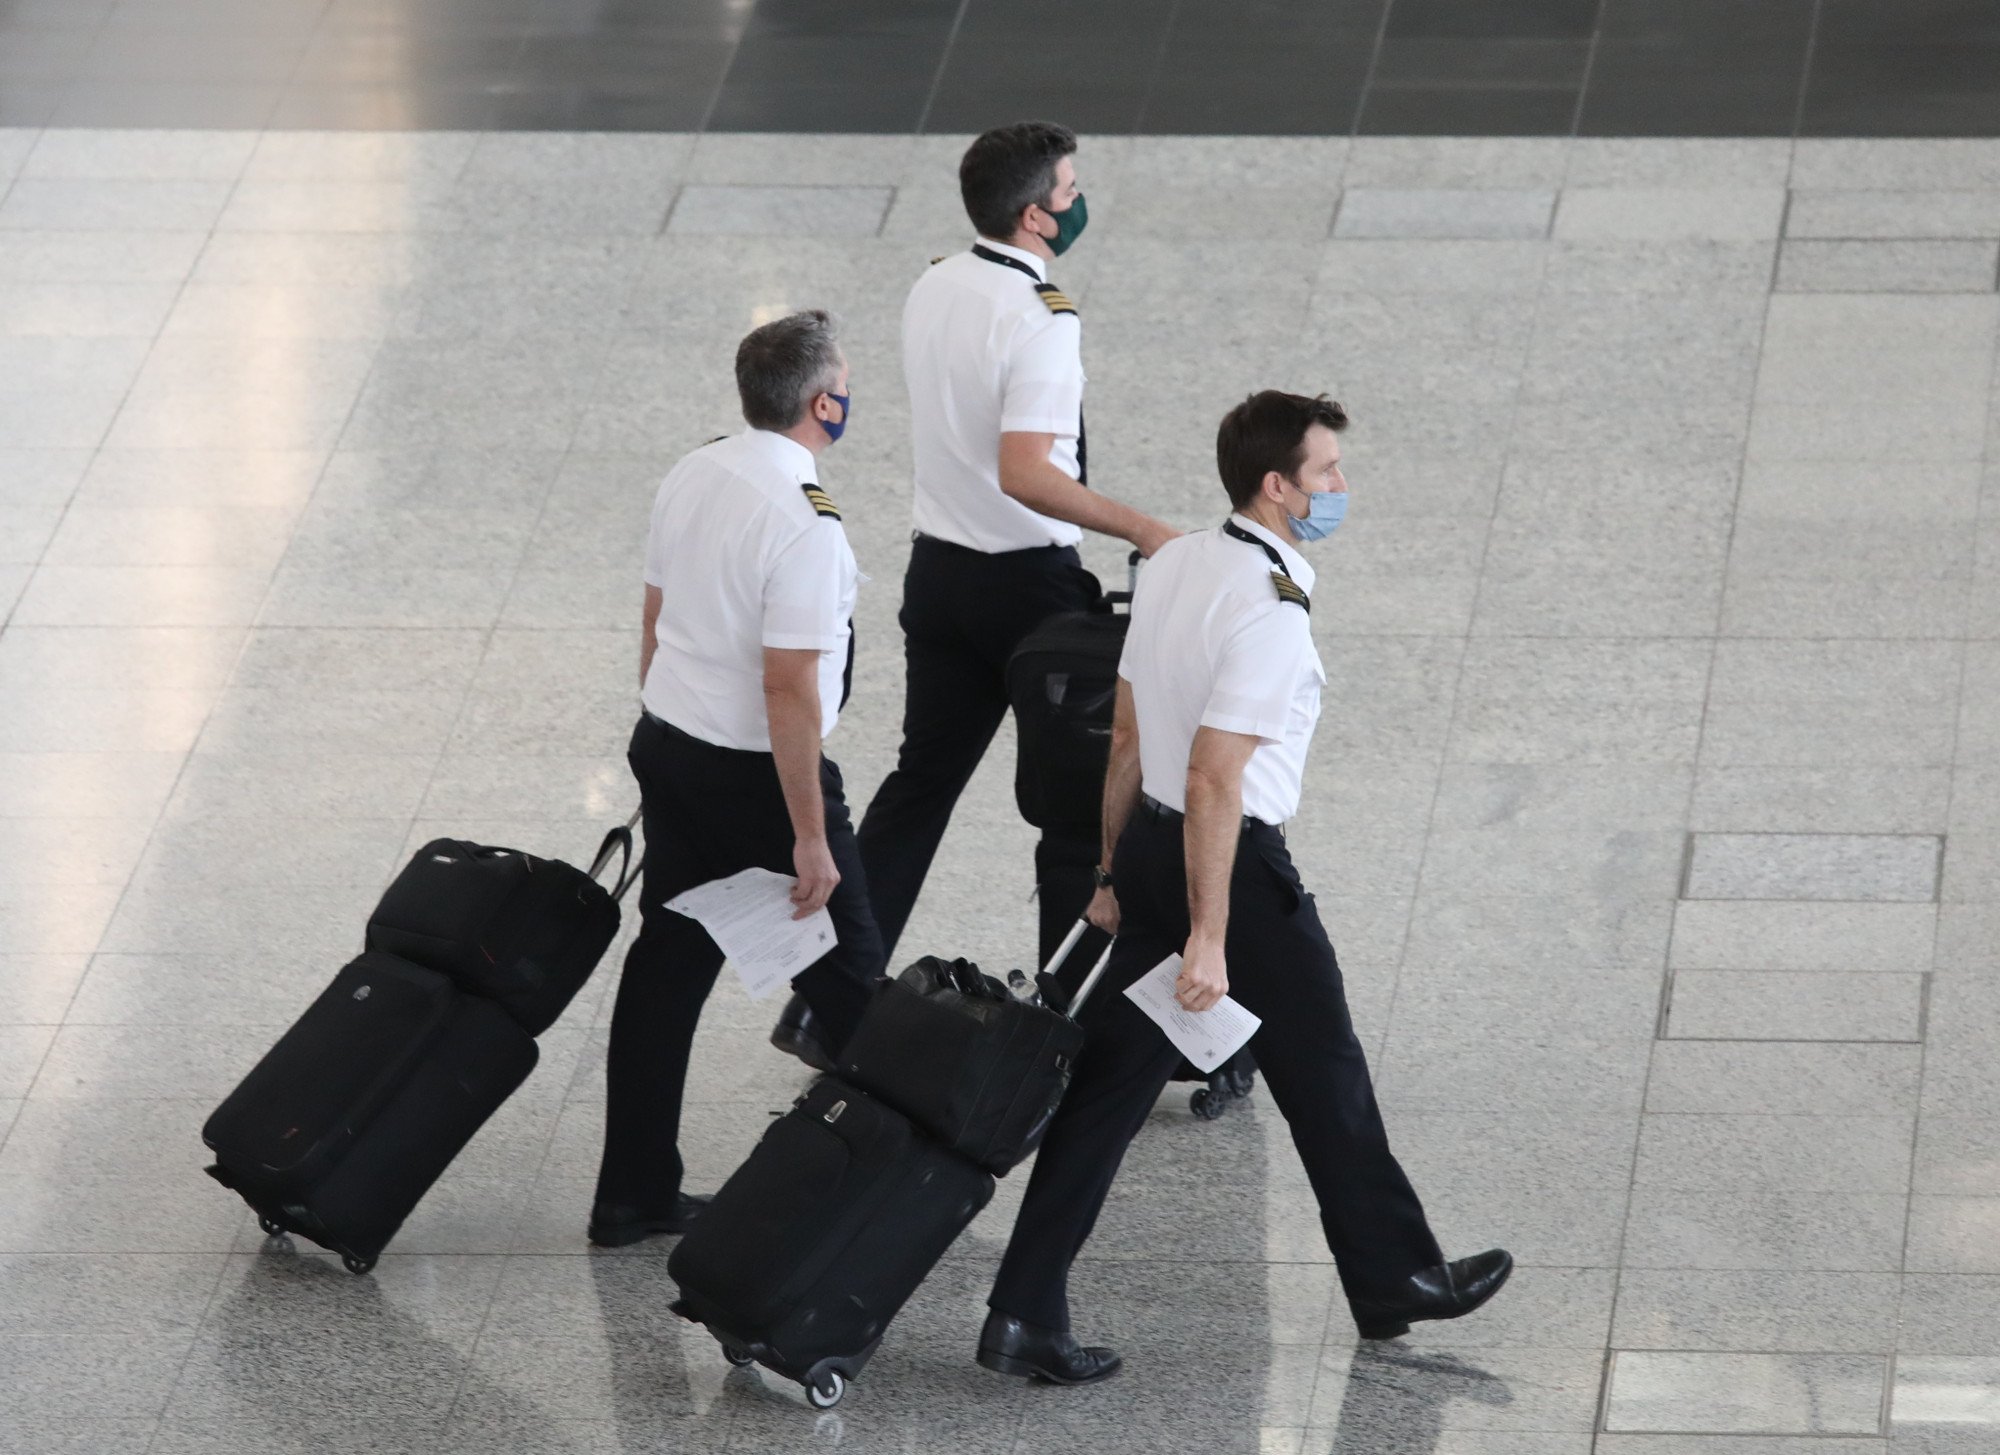 hong kong’s cathay pacific to offer pilots 3.8% rise in basic salary but union says crews will need to fly more hours to get increase